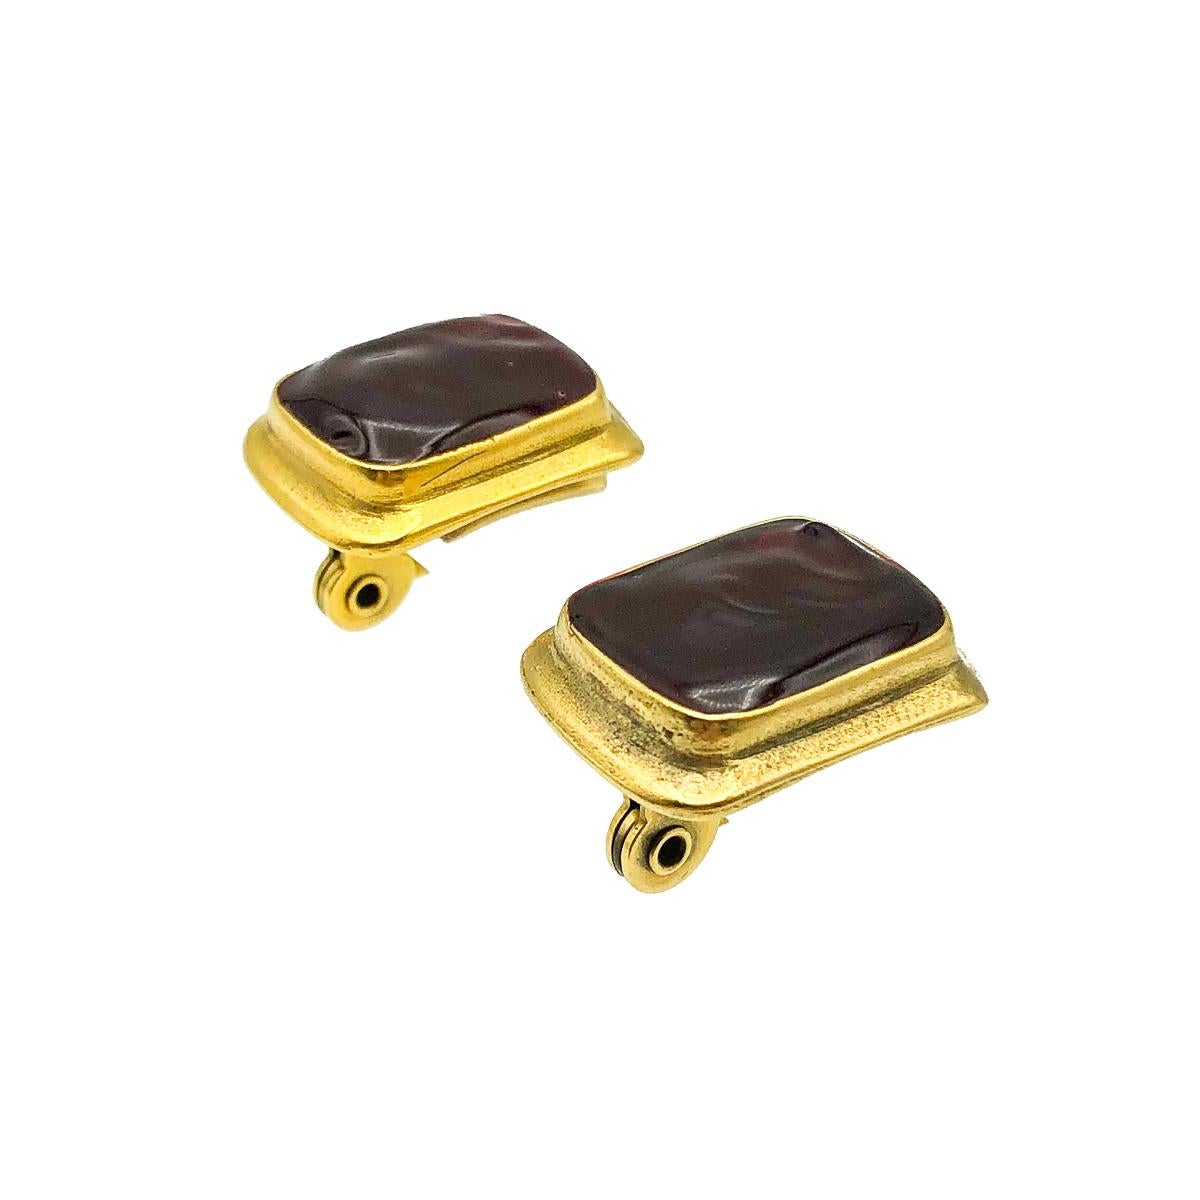 Vintage YSL pate de verre Earrings. Crafted in gold plated metal and set with stunning pate de verre or poured glass in a rich deep red jewel colour. In very good vintage condition. Signed. Approx. 2.3cms. A beautiful pair of jewel inspired clip ons